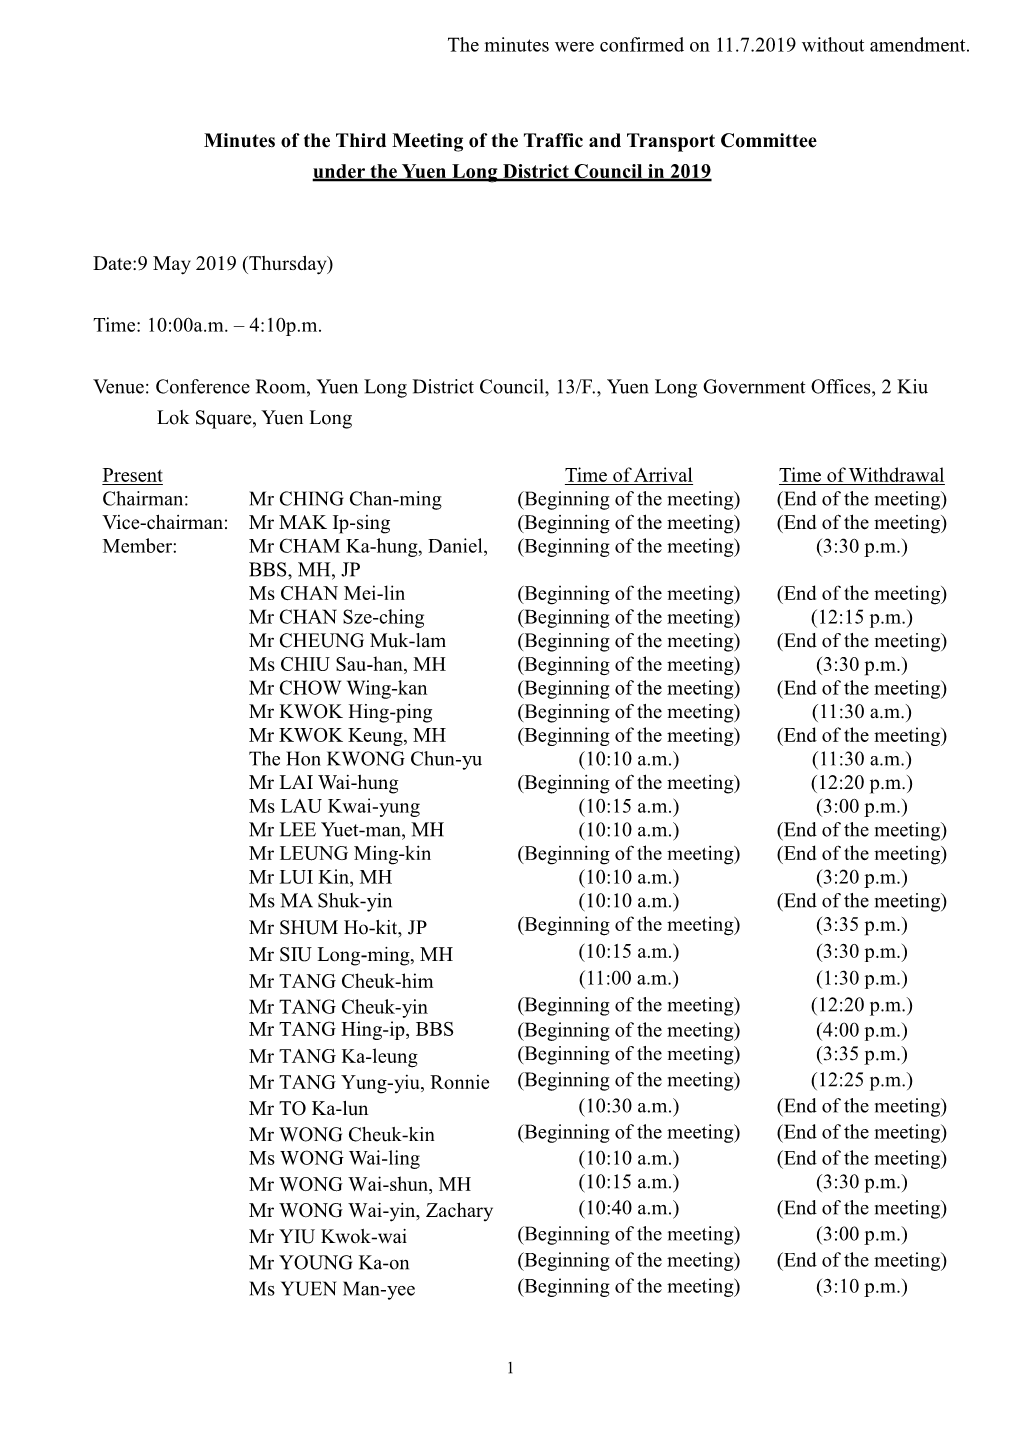 Minutes of the Third Meeting of the Traffic and Transport Committee Under the Yuen Long District Council in 2019